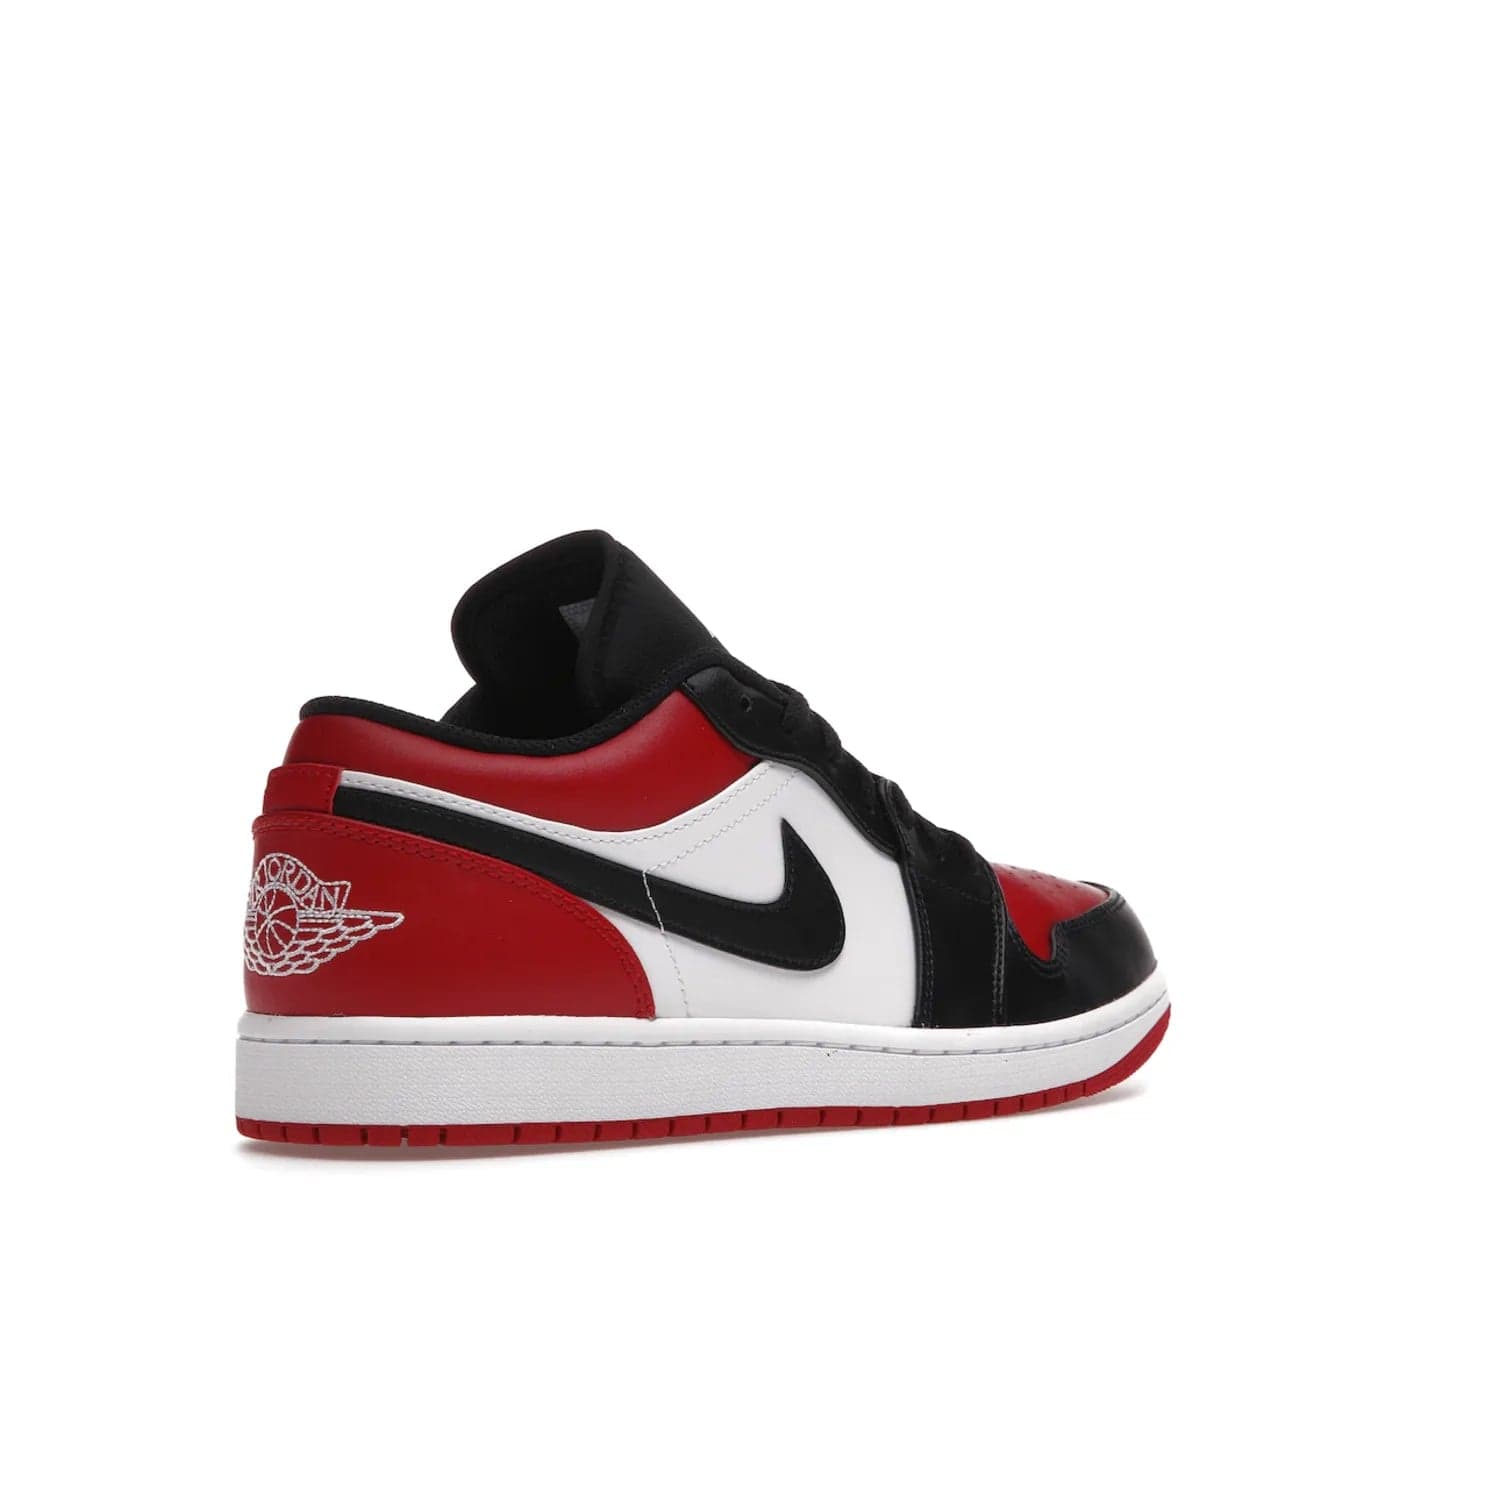 Jordan 1 Low Bred Toe - Image 33 - Only at www.BallersClubKickz.com - Step into the iconic Jordan 1 Retro. Mixing and matching of leather in red, black, and white makes for a unique colorway. Finished off with a Wing logo embroidery & Jumpman label. Comfortable and stylish at an affordable $100, the Jordan 1 Low Bred Toe is perfect for any true sneaker fan.